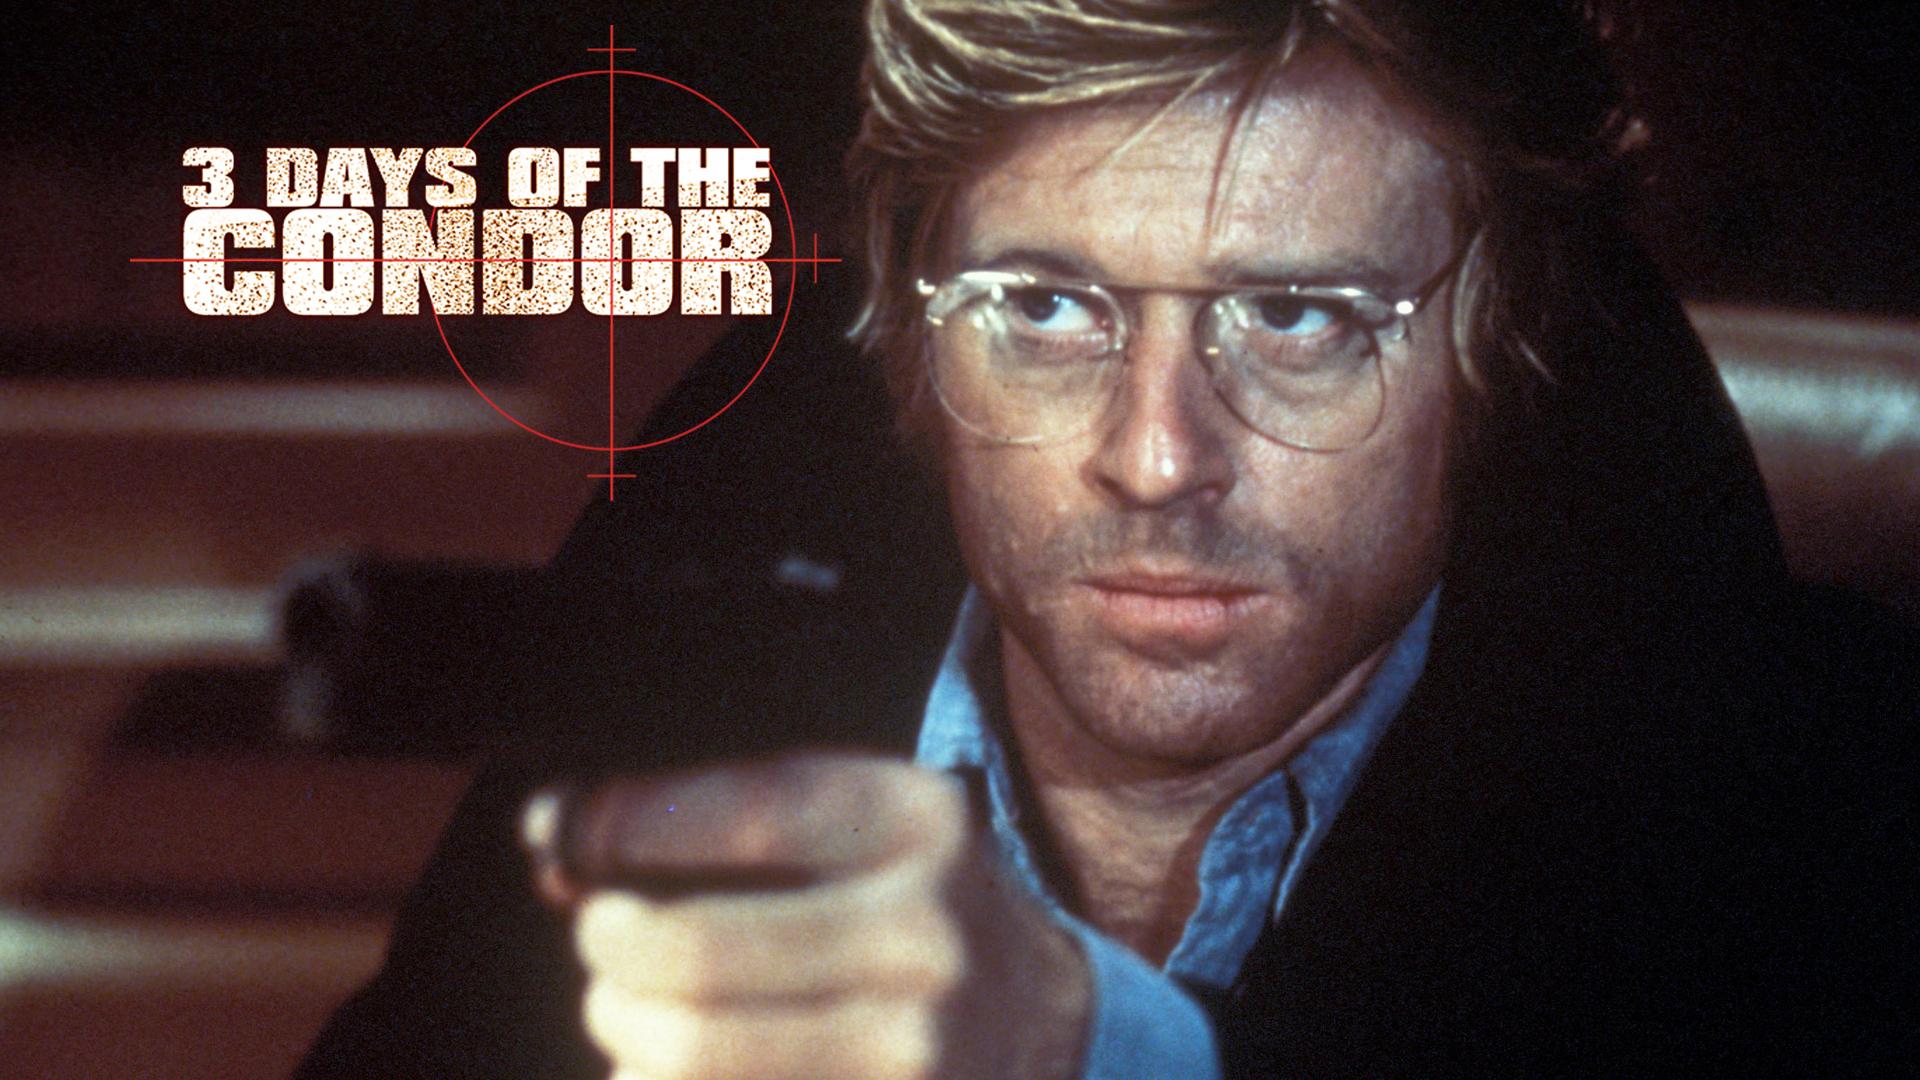 Days of the Condor. Watch Free Movies & TV Shows Online